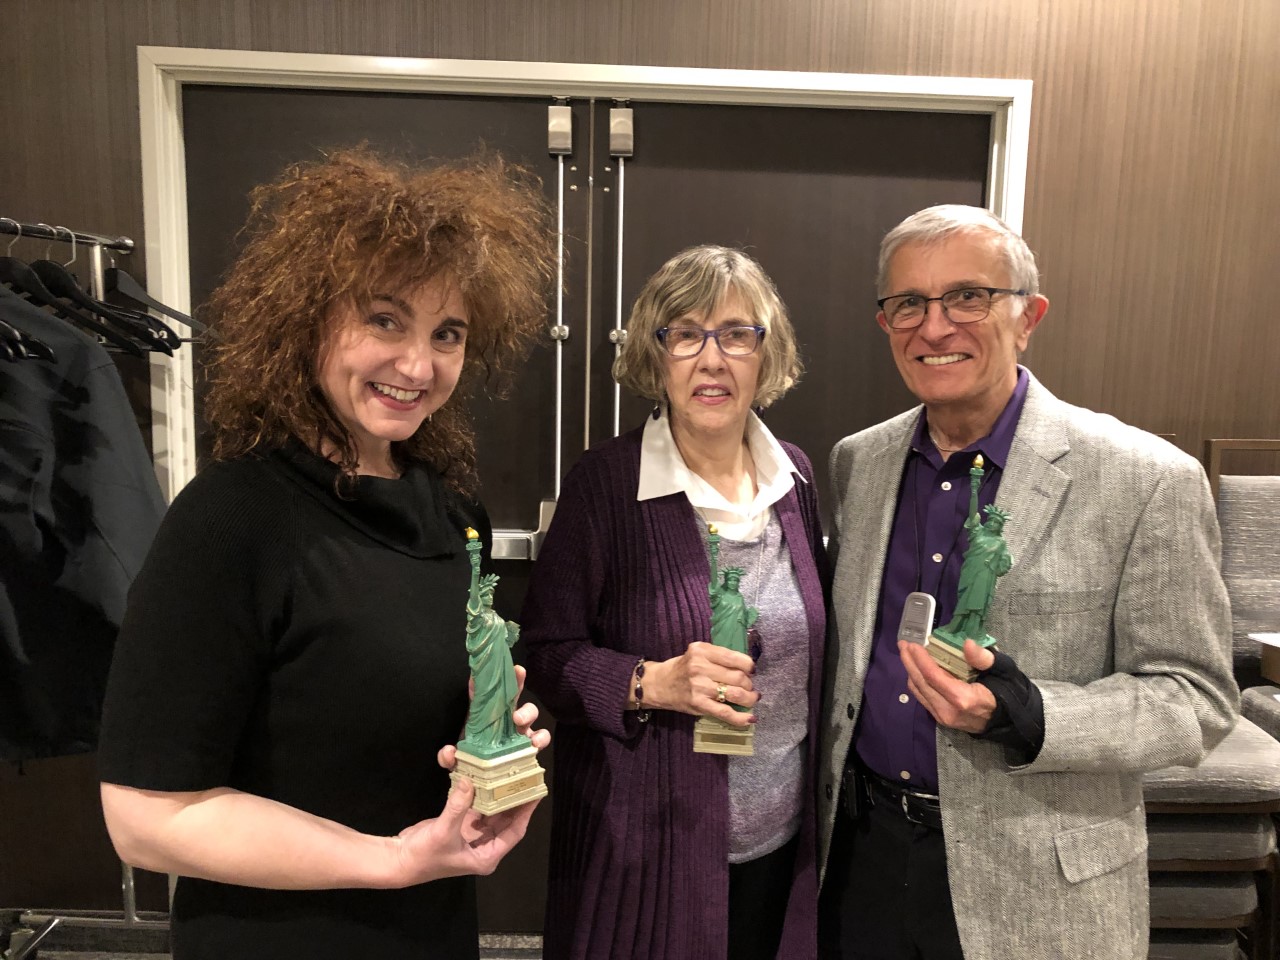 Lisa Gioia Randy & Dianne Szabla with their 2018 Defender of Liberty Awards